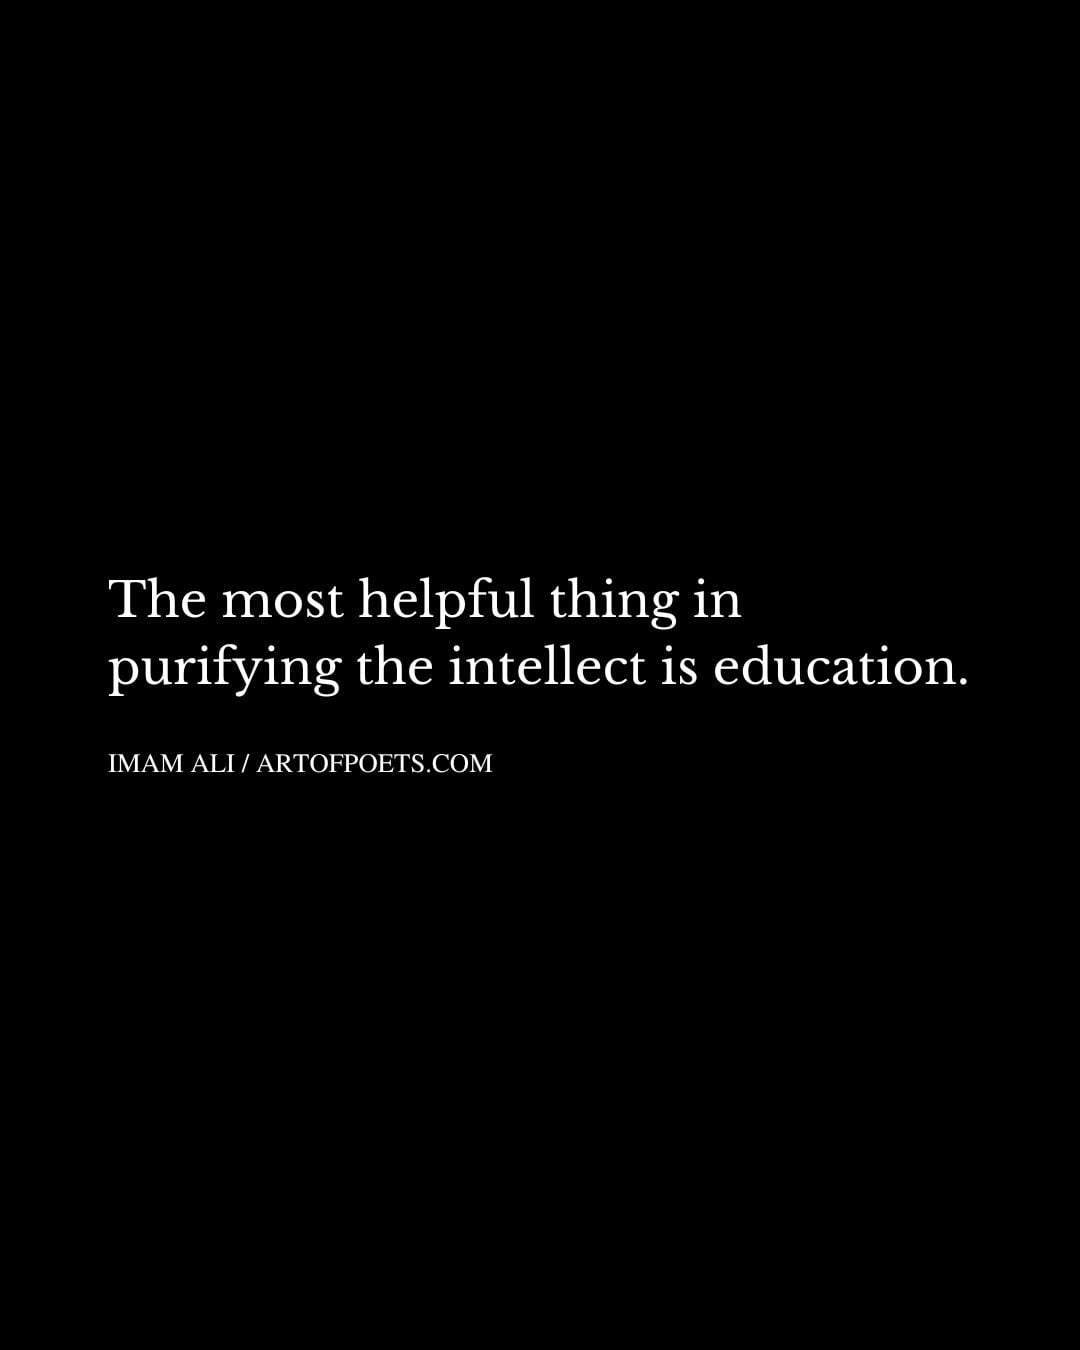 The most helpful thing in purifying the intellect is education